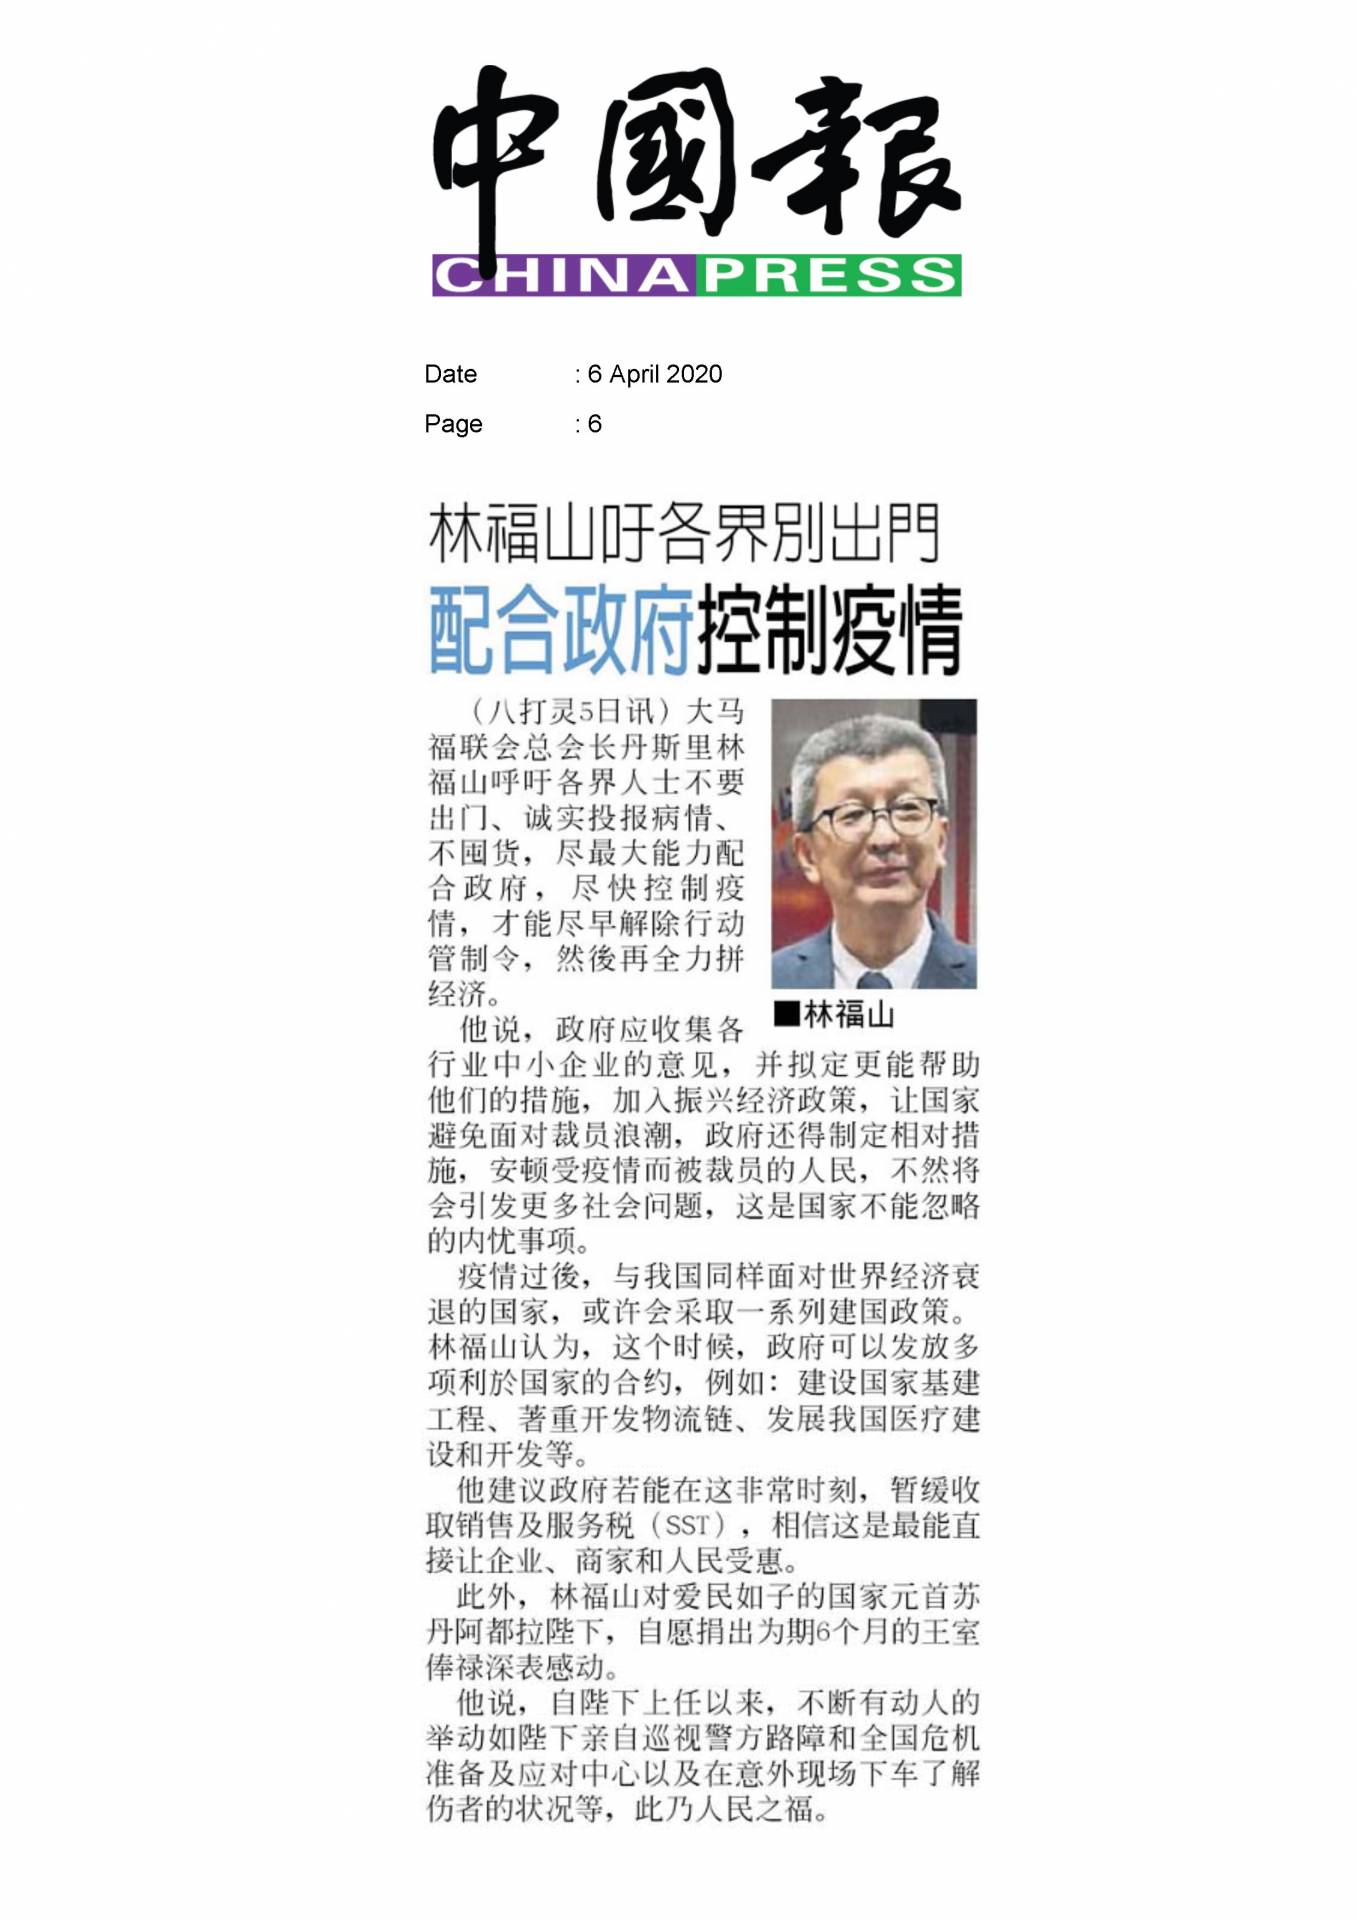 2020.04.06 China Press - Lim Hock San urges public to comply with government to help control outbreak